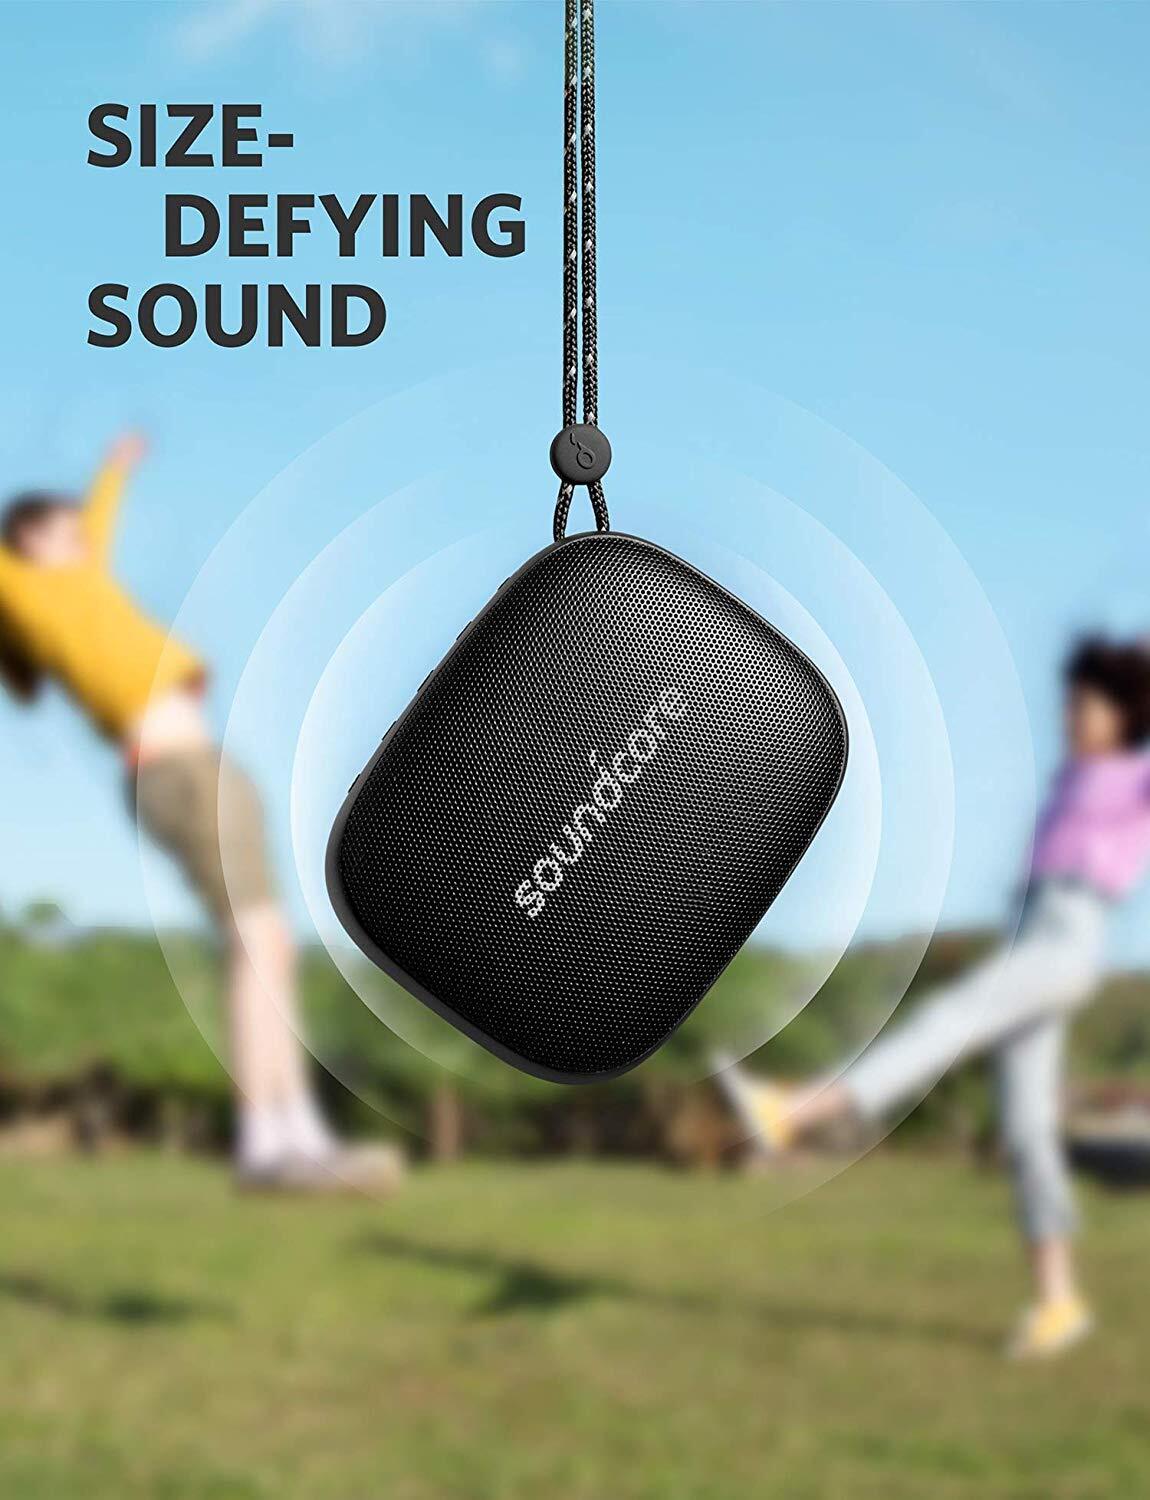 Soundcore Anker Icon Mini Waterproof Bluetooth Speaker with Explosive Sound, IP67 Water Resistance, Pocket Size and Built-in Mic-M000000000460 www.mysocially.com